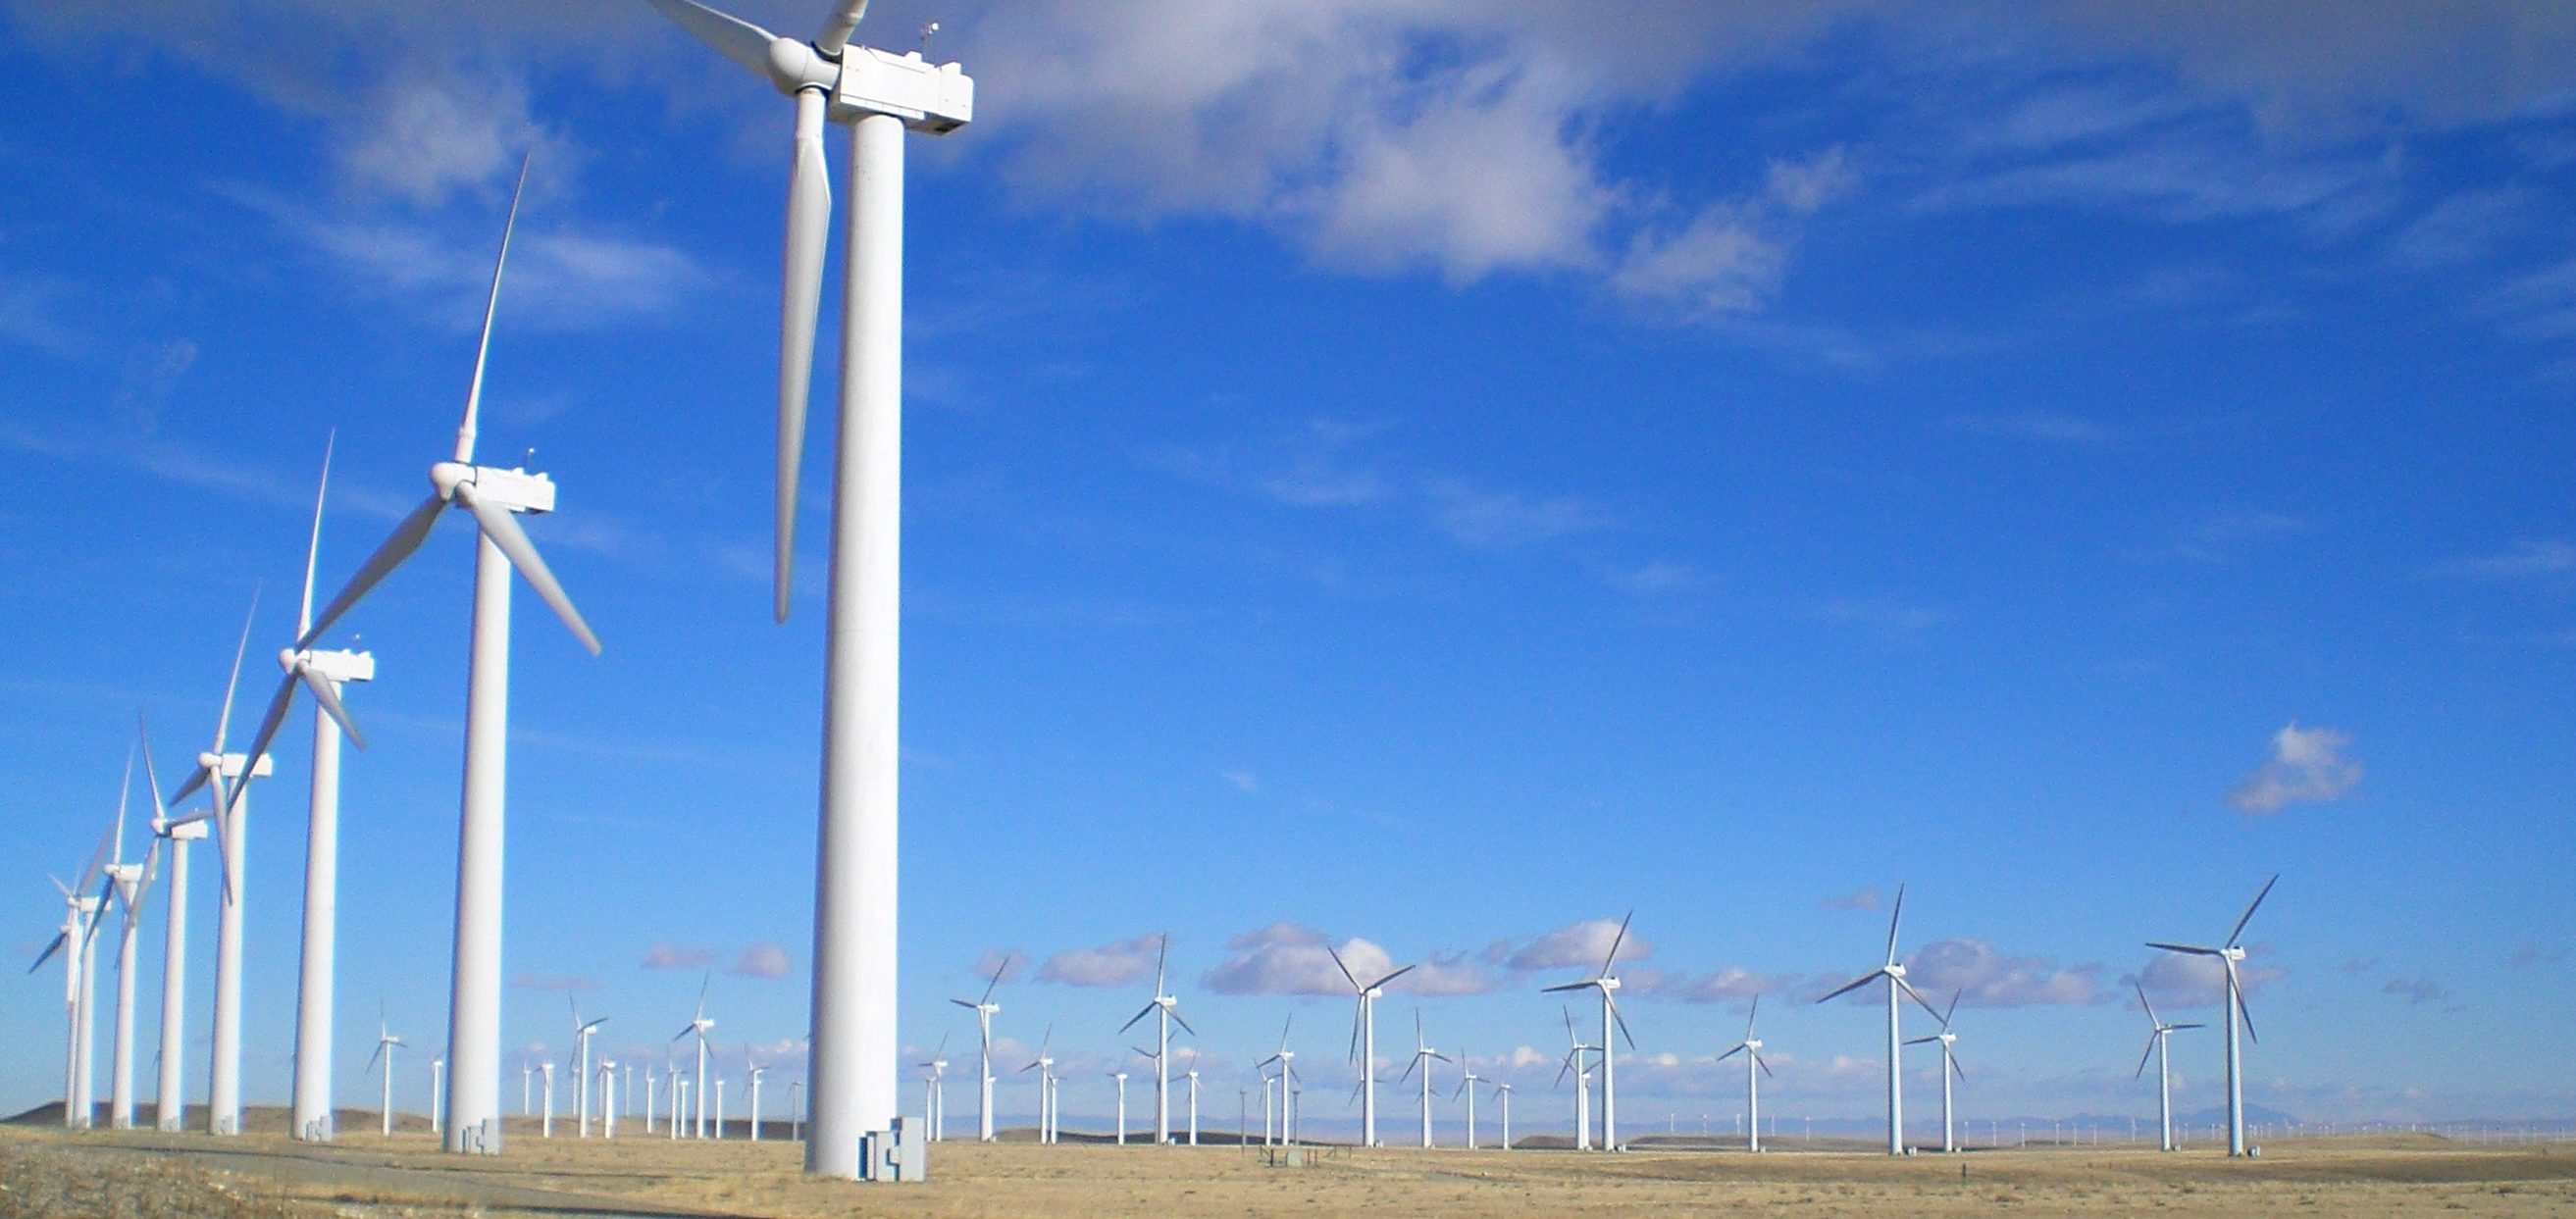 dozens of wind turbines on a prairie project WLC provided wind and transmission support services